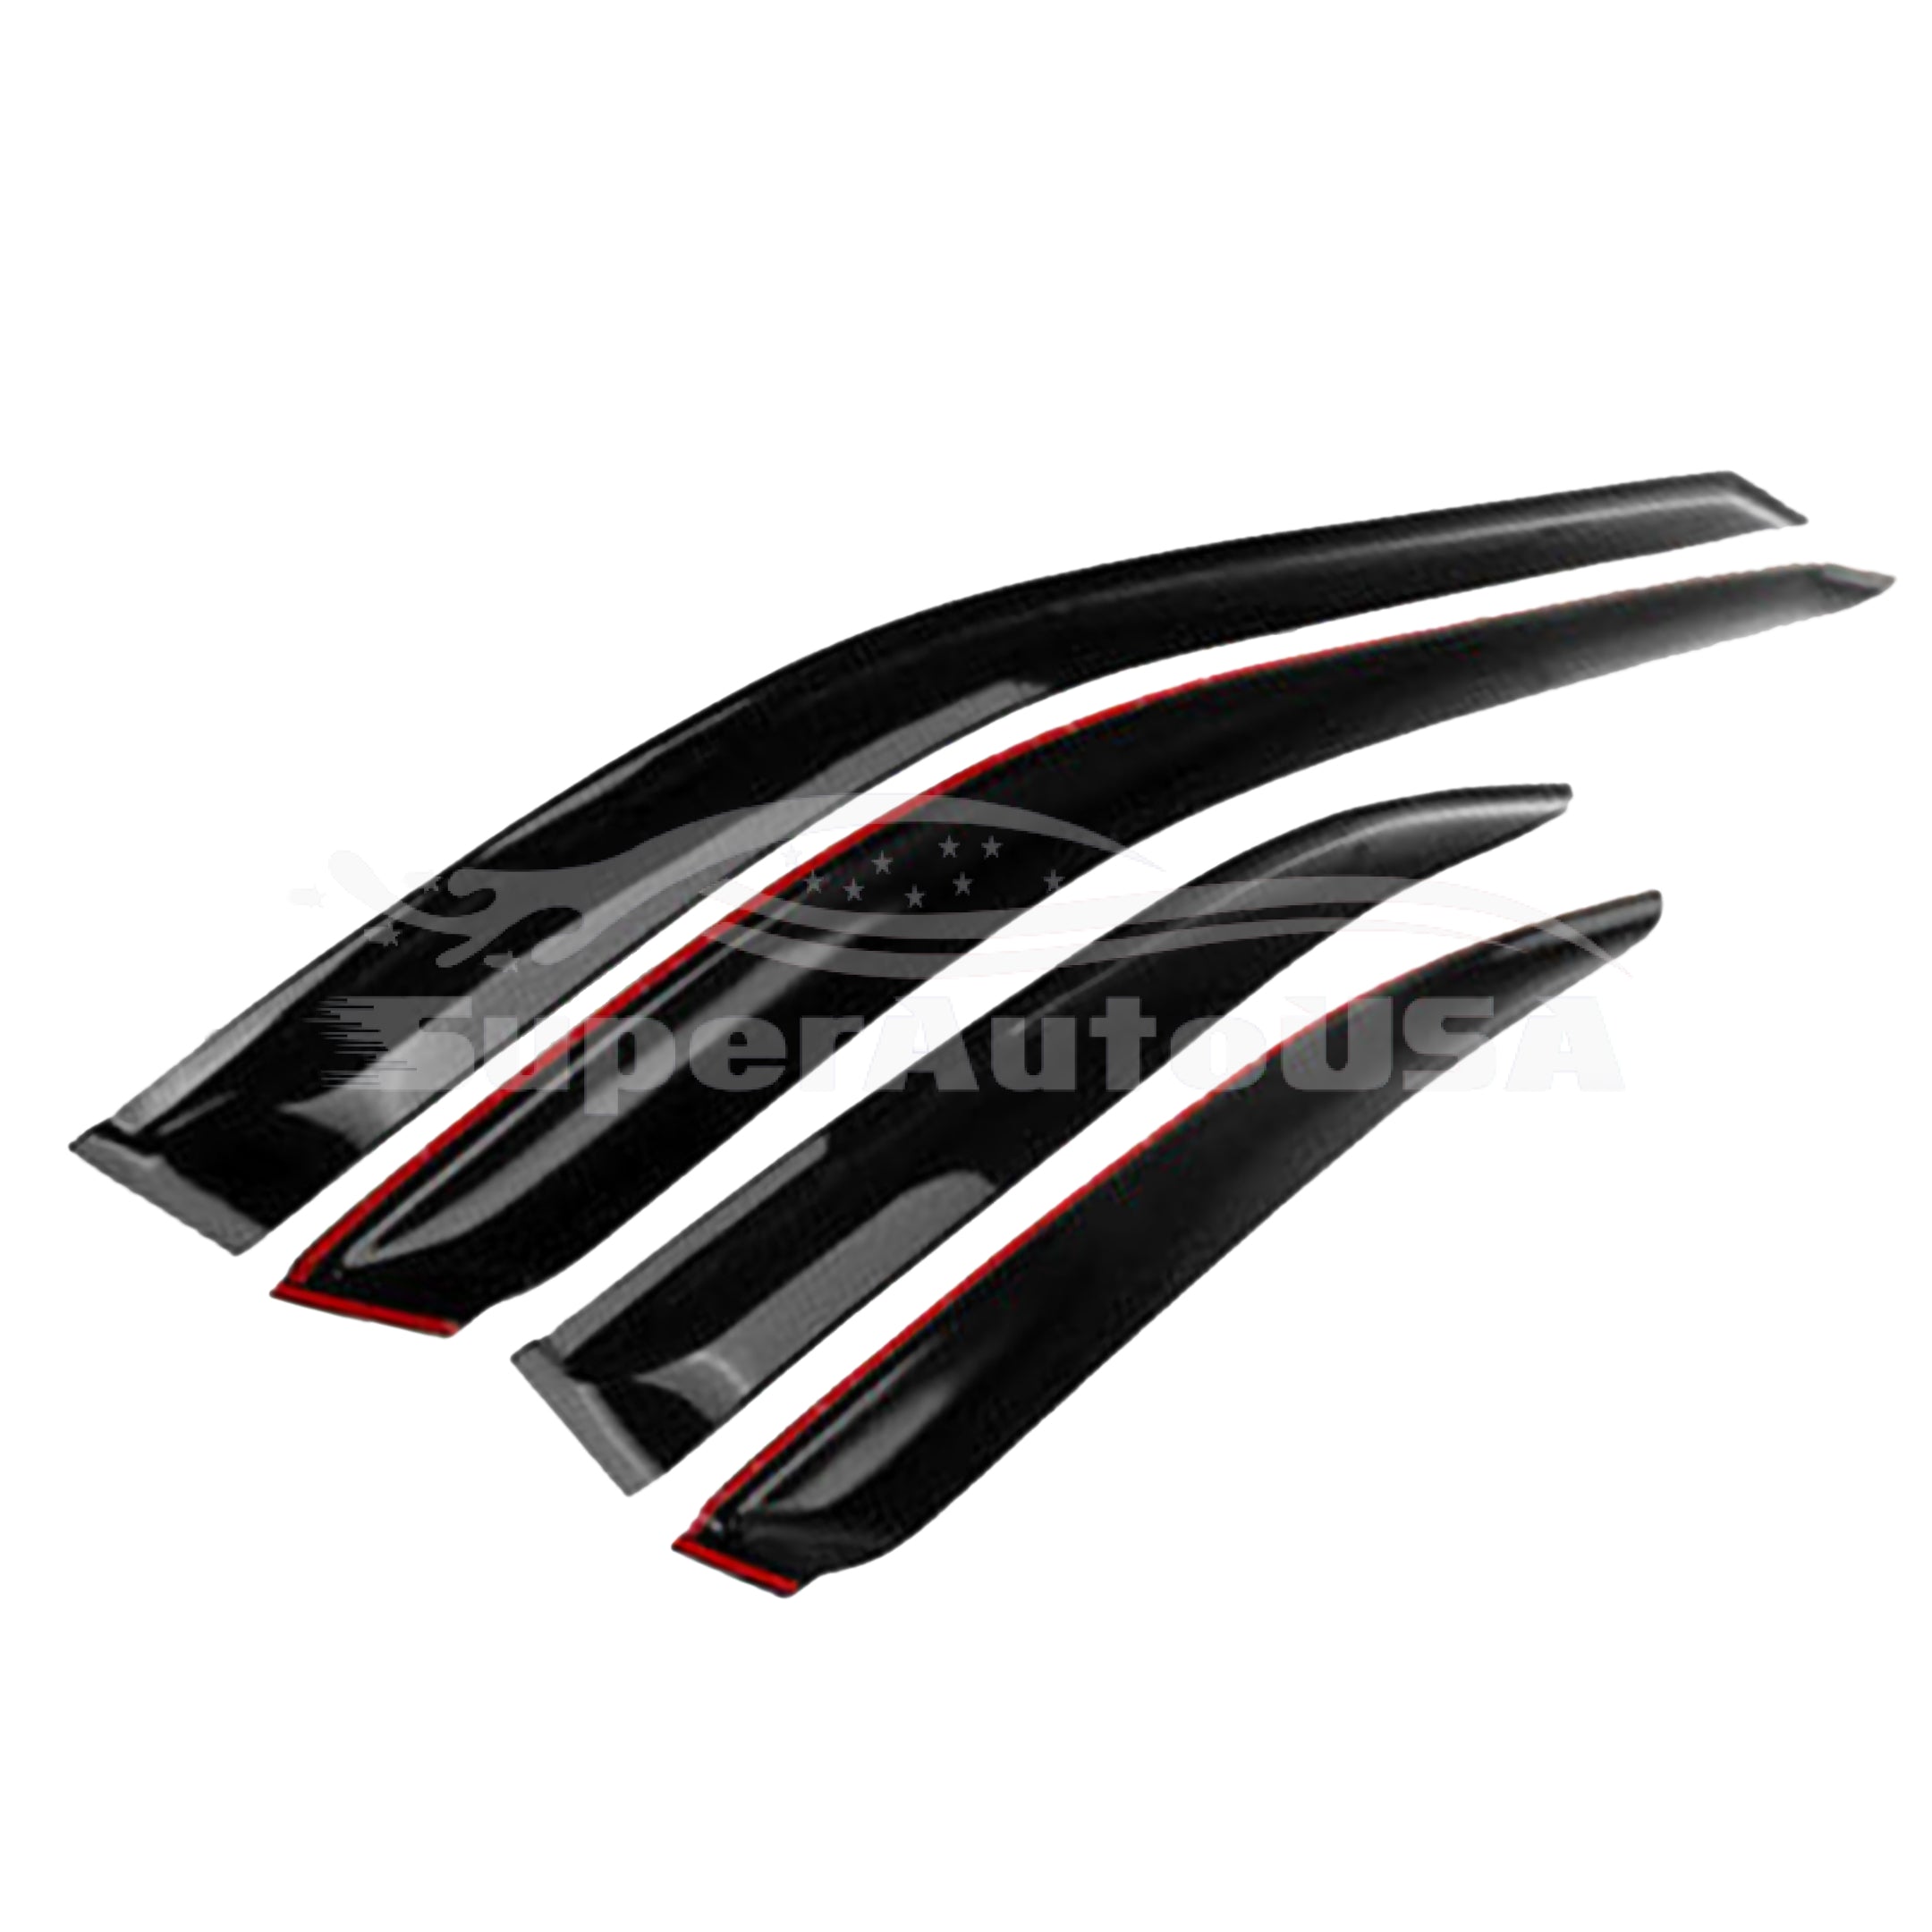 Fit 2010-2015 Toyota Prius Out-Channel Vent Window Visors Rain Sun Wind Guards Shade Deflectors